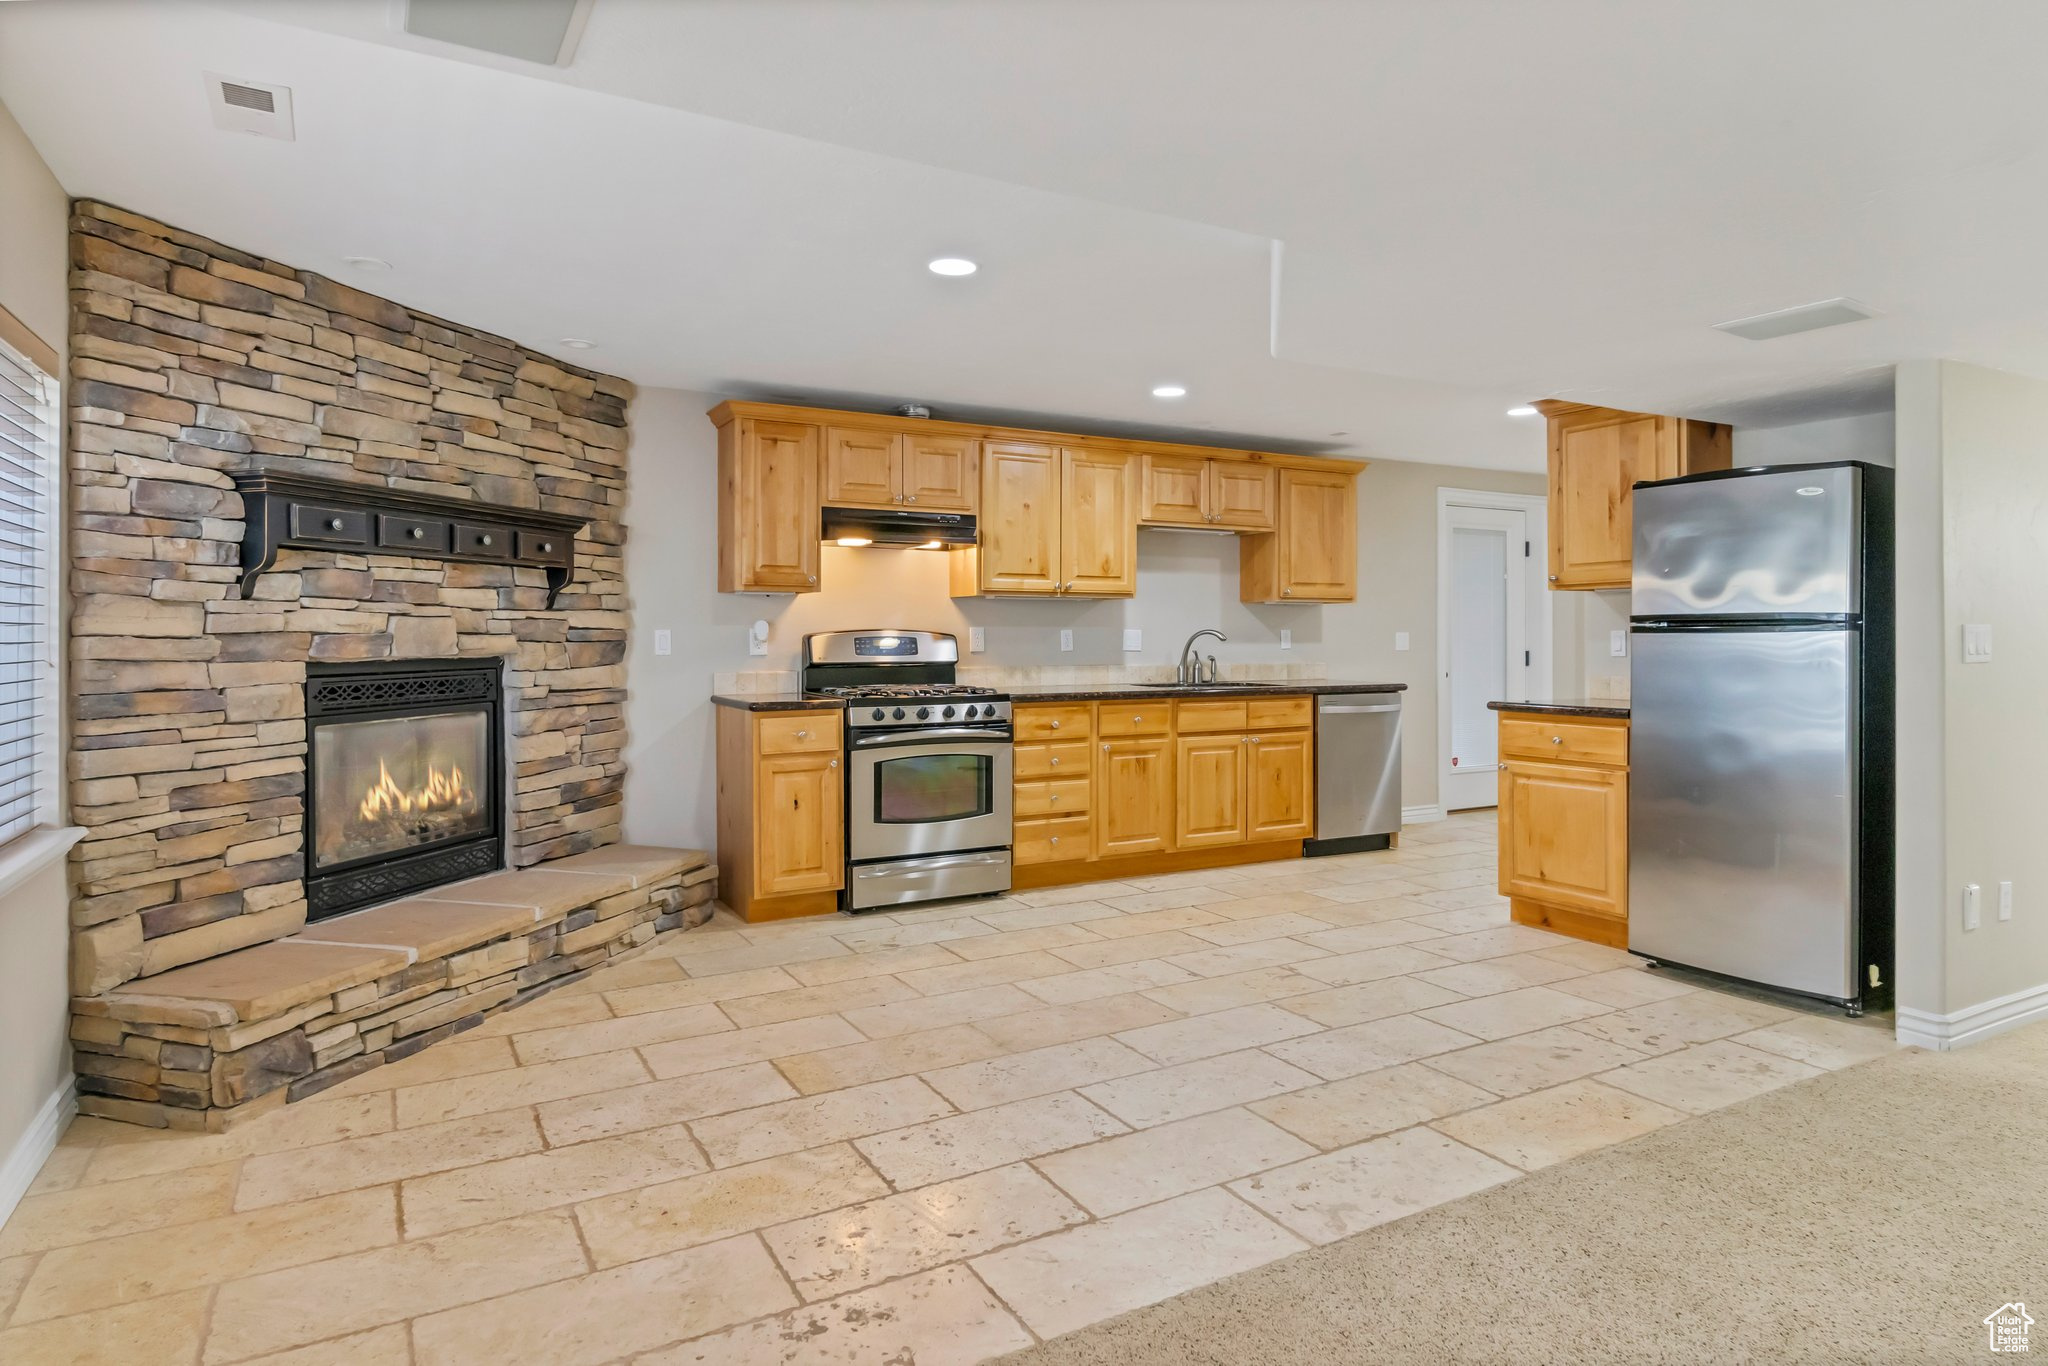 Kitchen with light brown cabinetry, sink, stainless steel appliances, and a stone fireplace